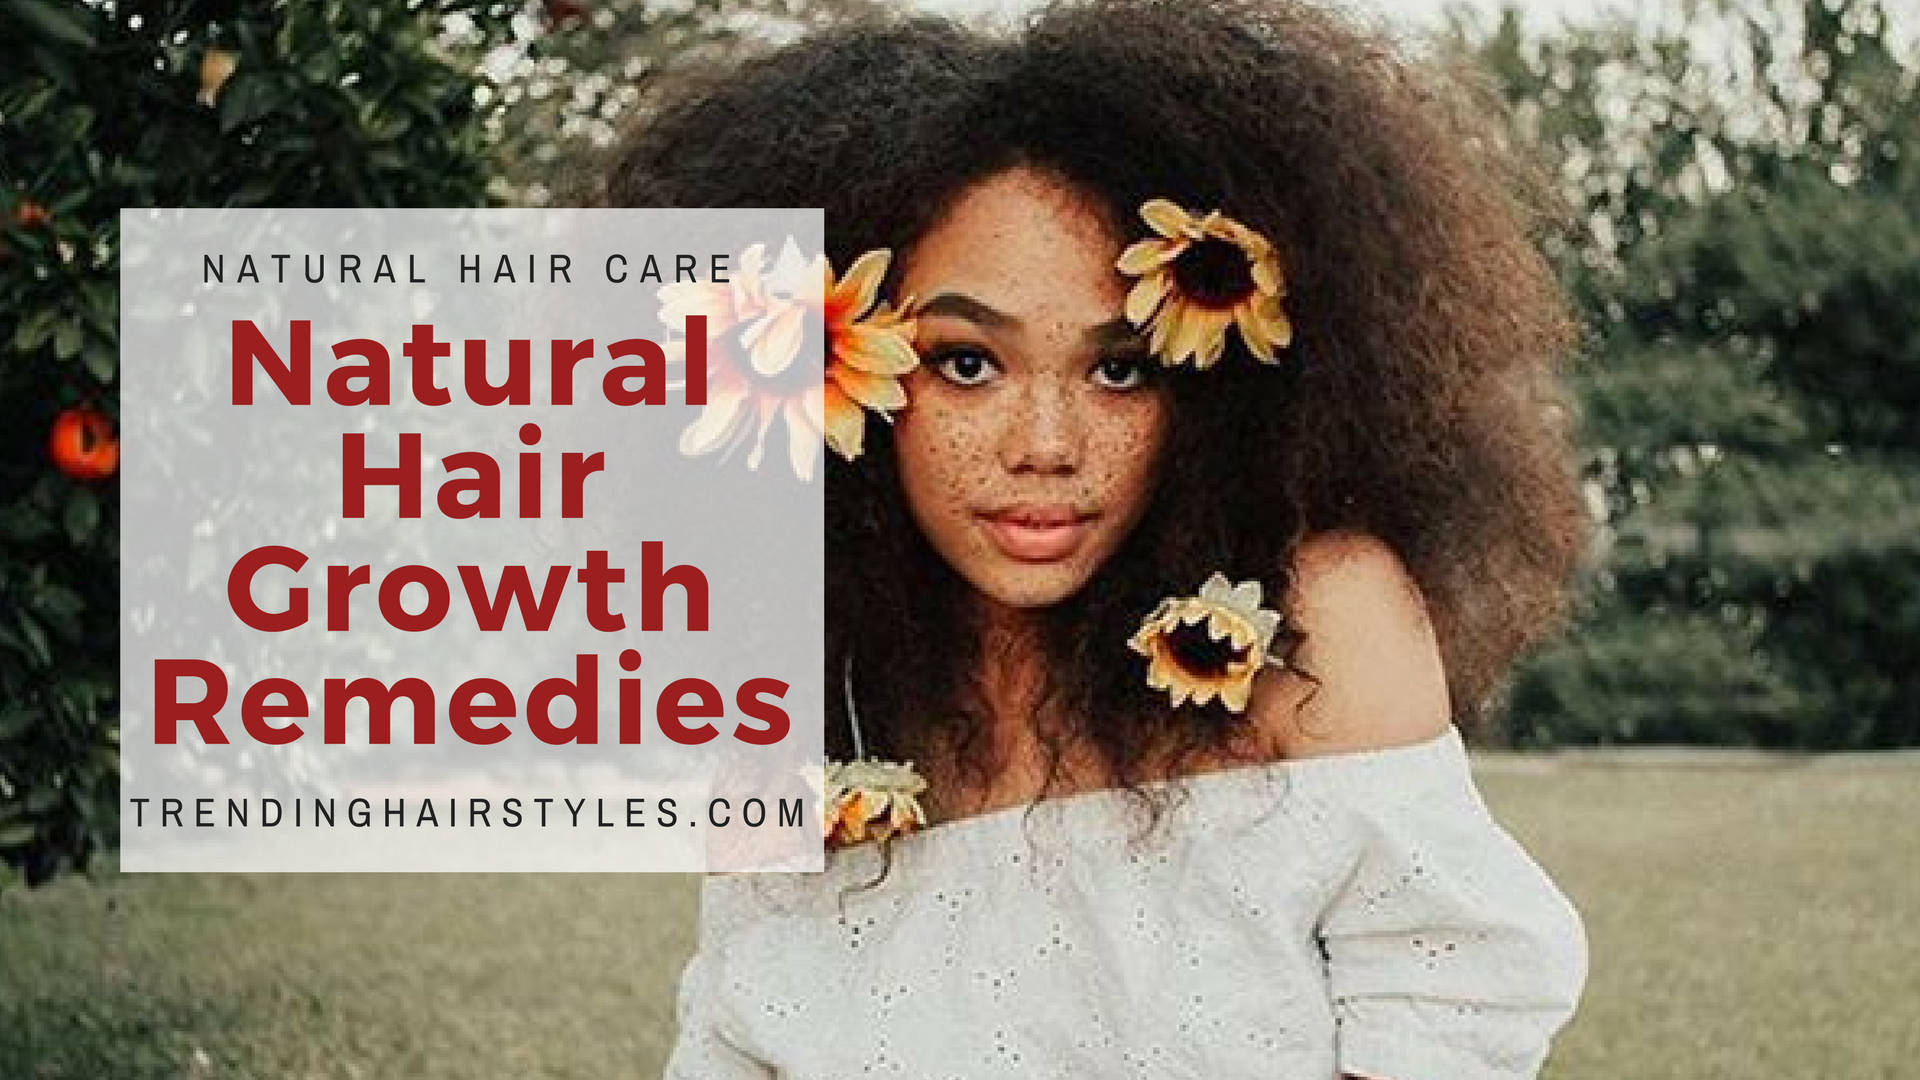 Dyi Natural Remedies For Hair Growth For Black Women